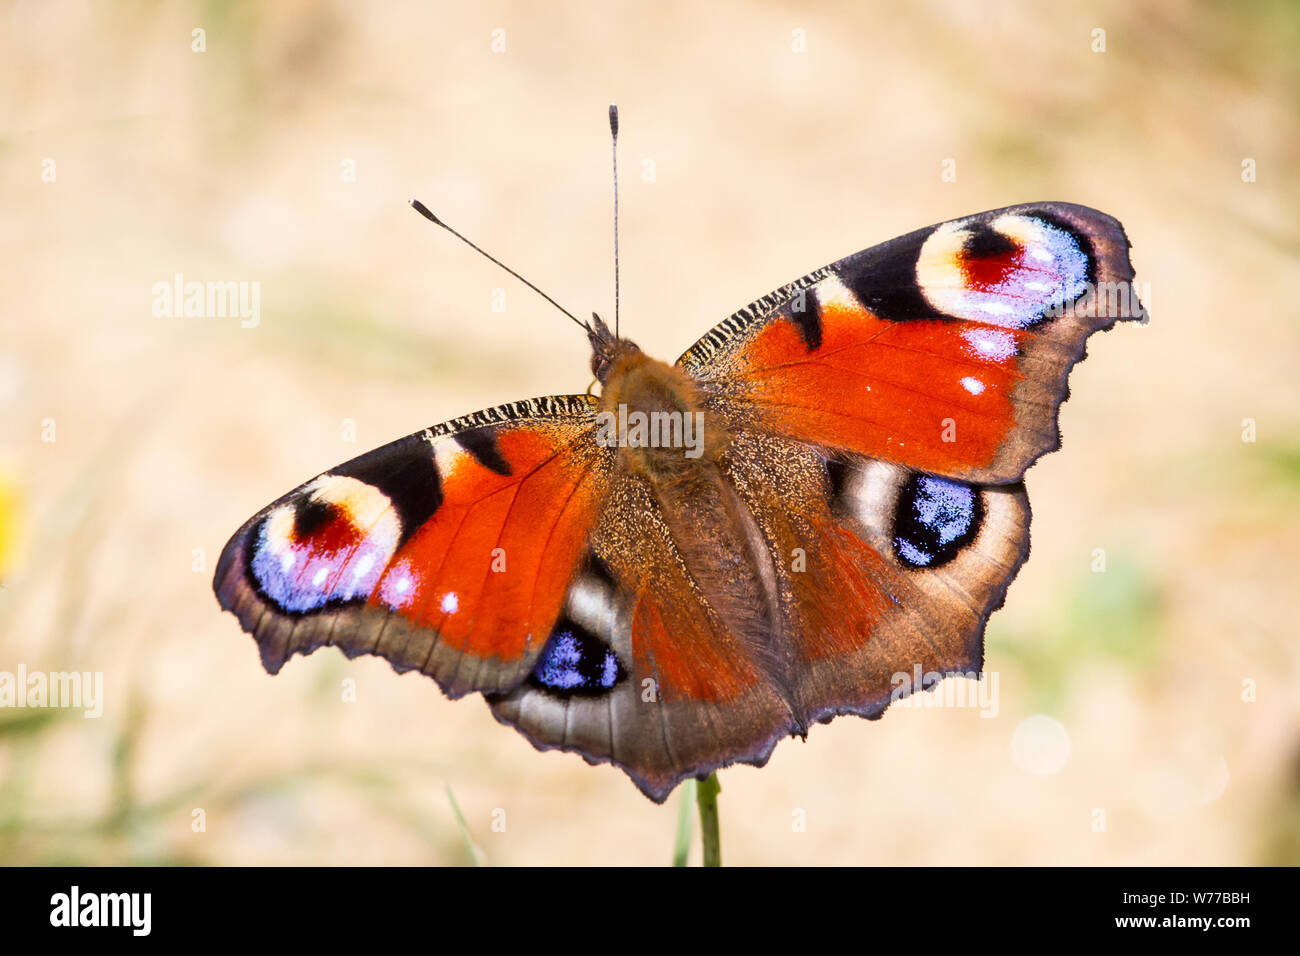 Lepidoptera Aglais io (peacock butterfly Schmetterling / Tagpfauenauge) Banque D'Images